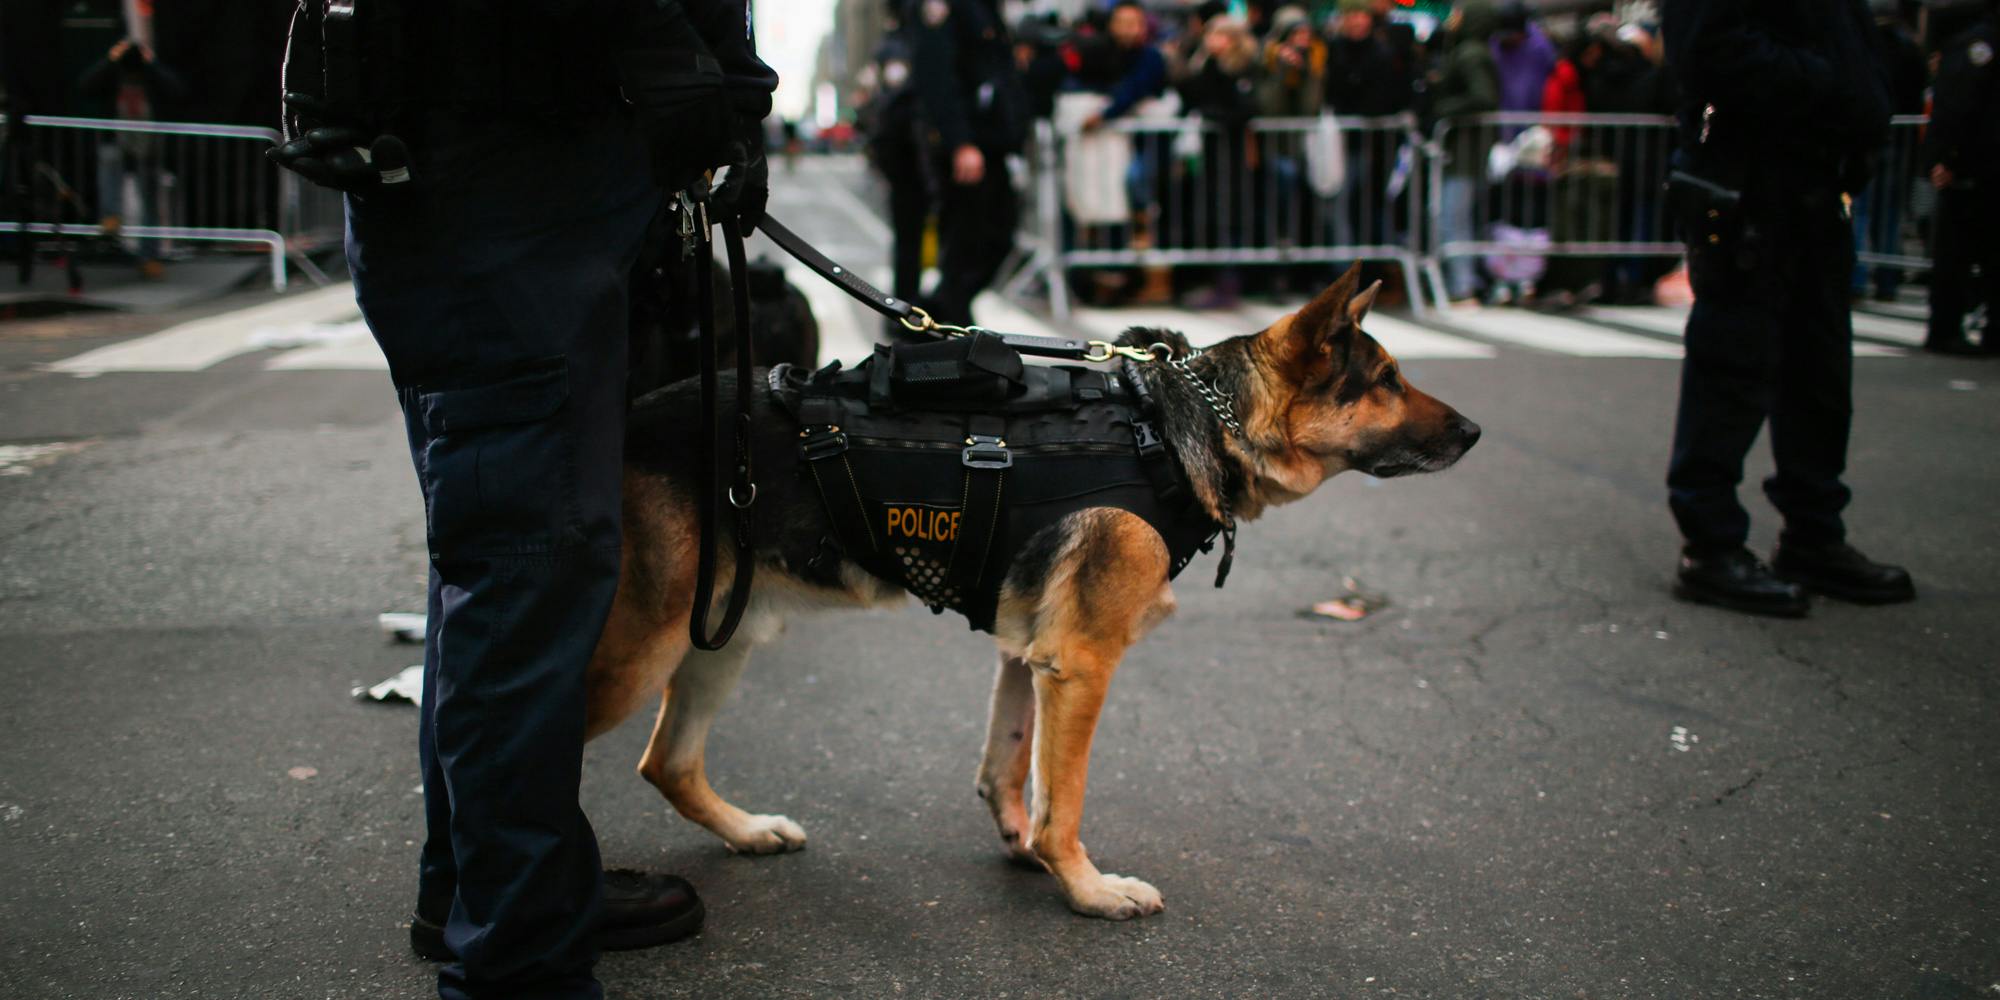 Illinois Cops Claim If Weed Is Legalized, They'll Have To Kill Their Police Dogs